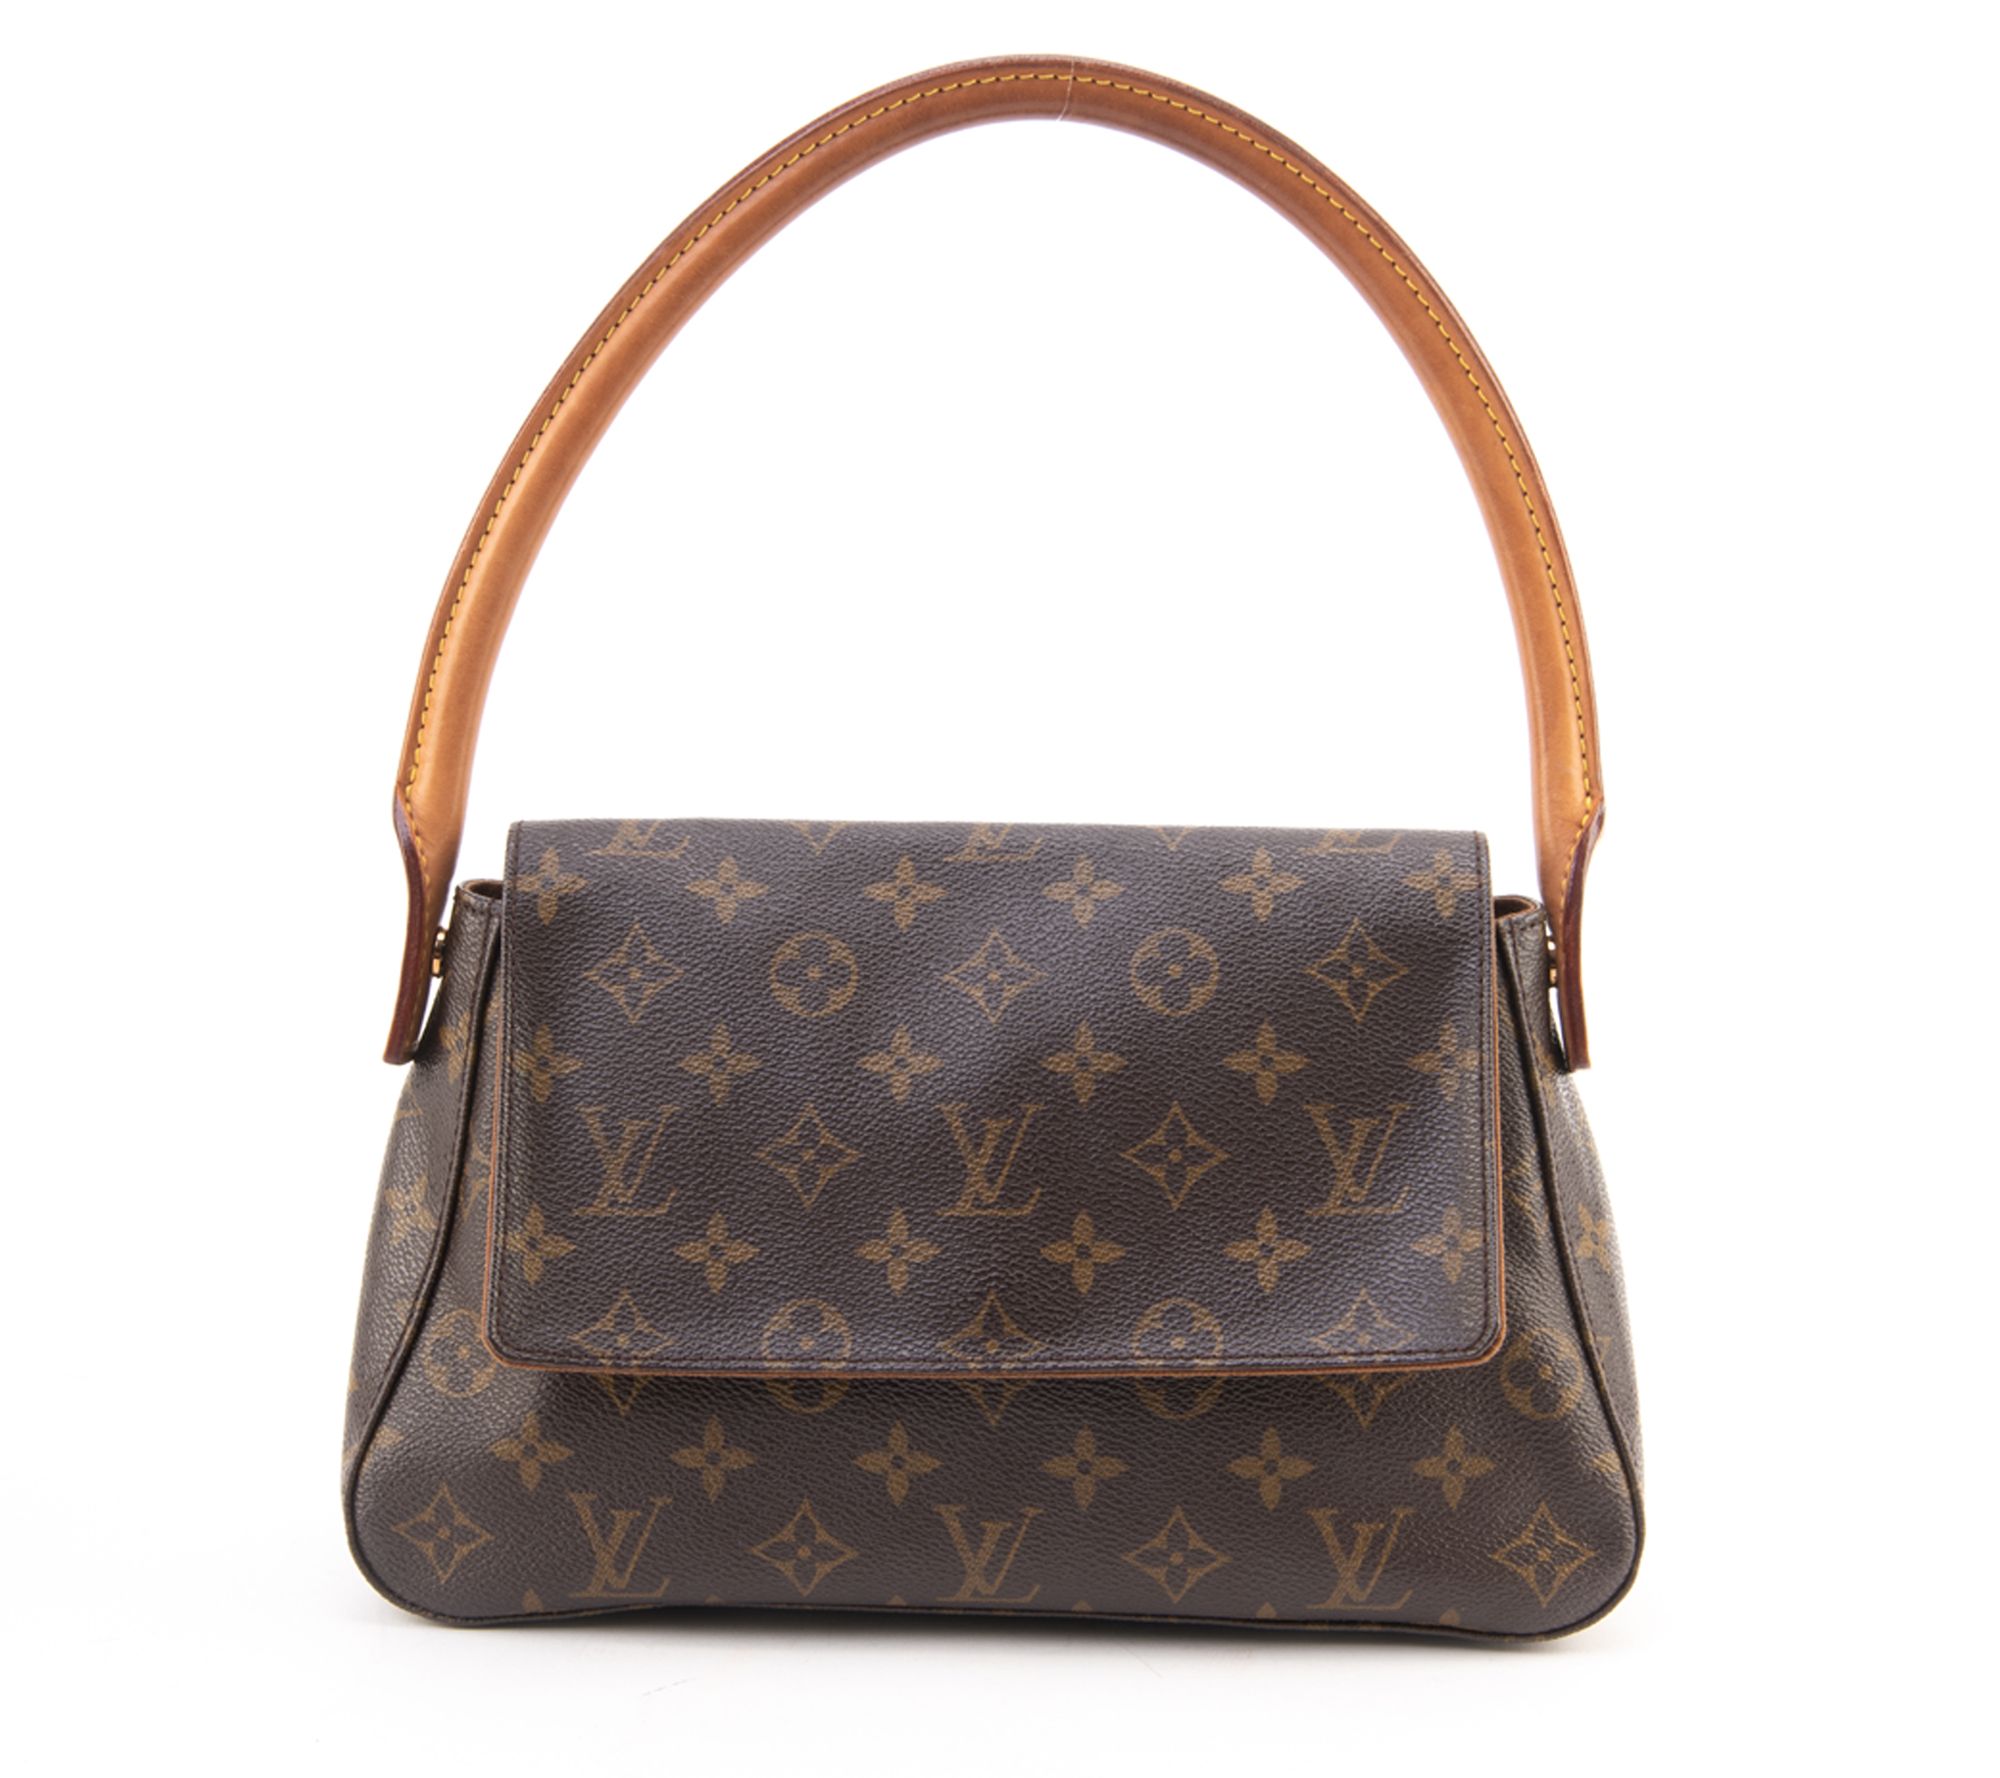 Pre-Owned Louis Vuitton Mini Looping 